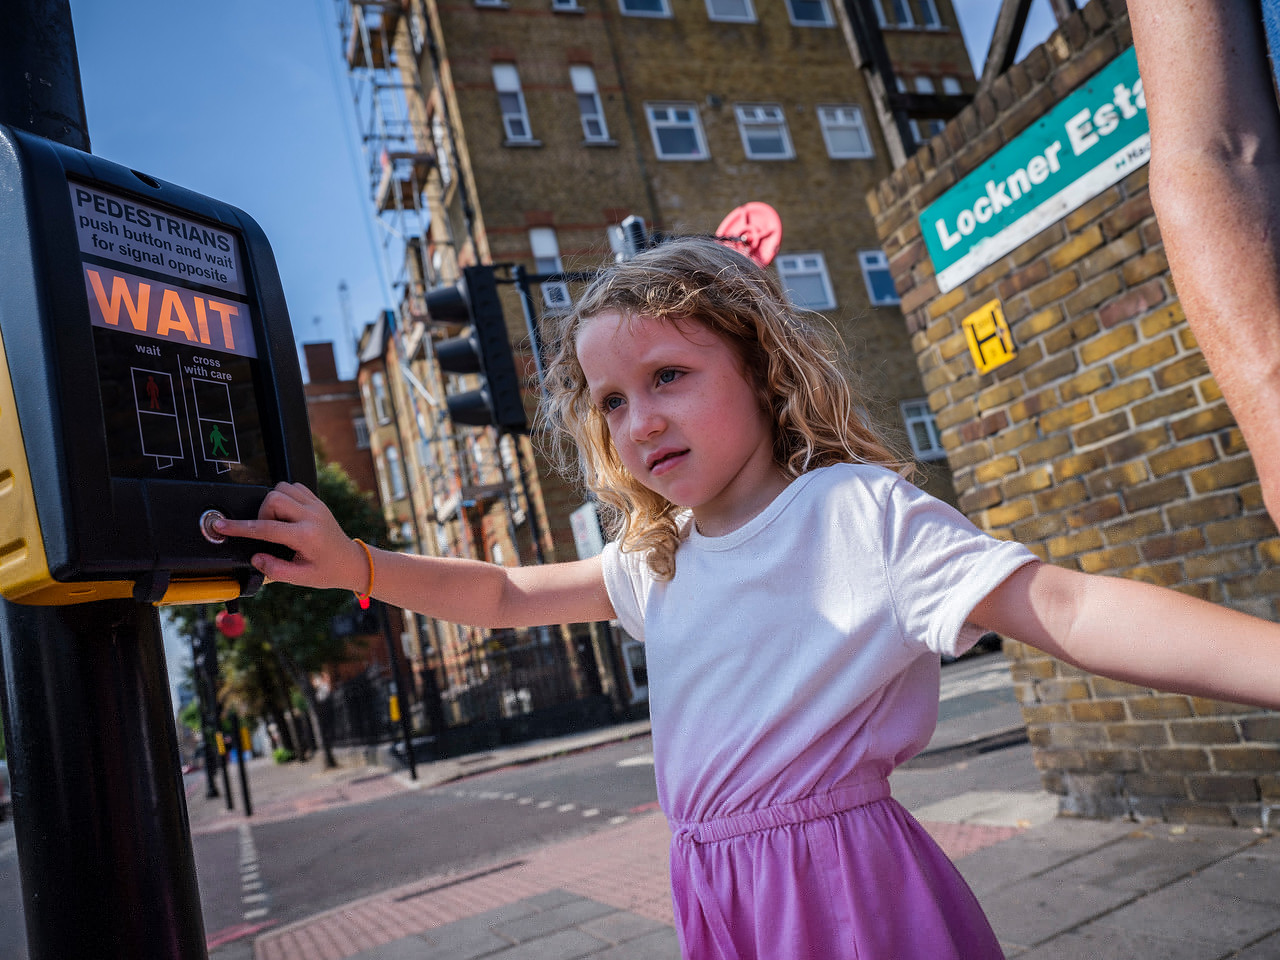 A young girl pressing the button at a controlled crossing